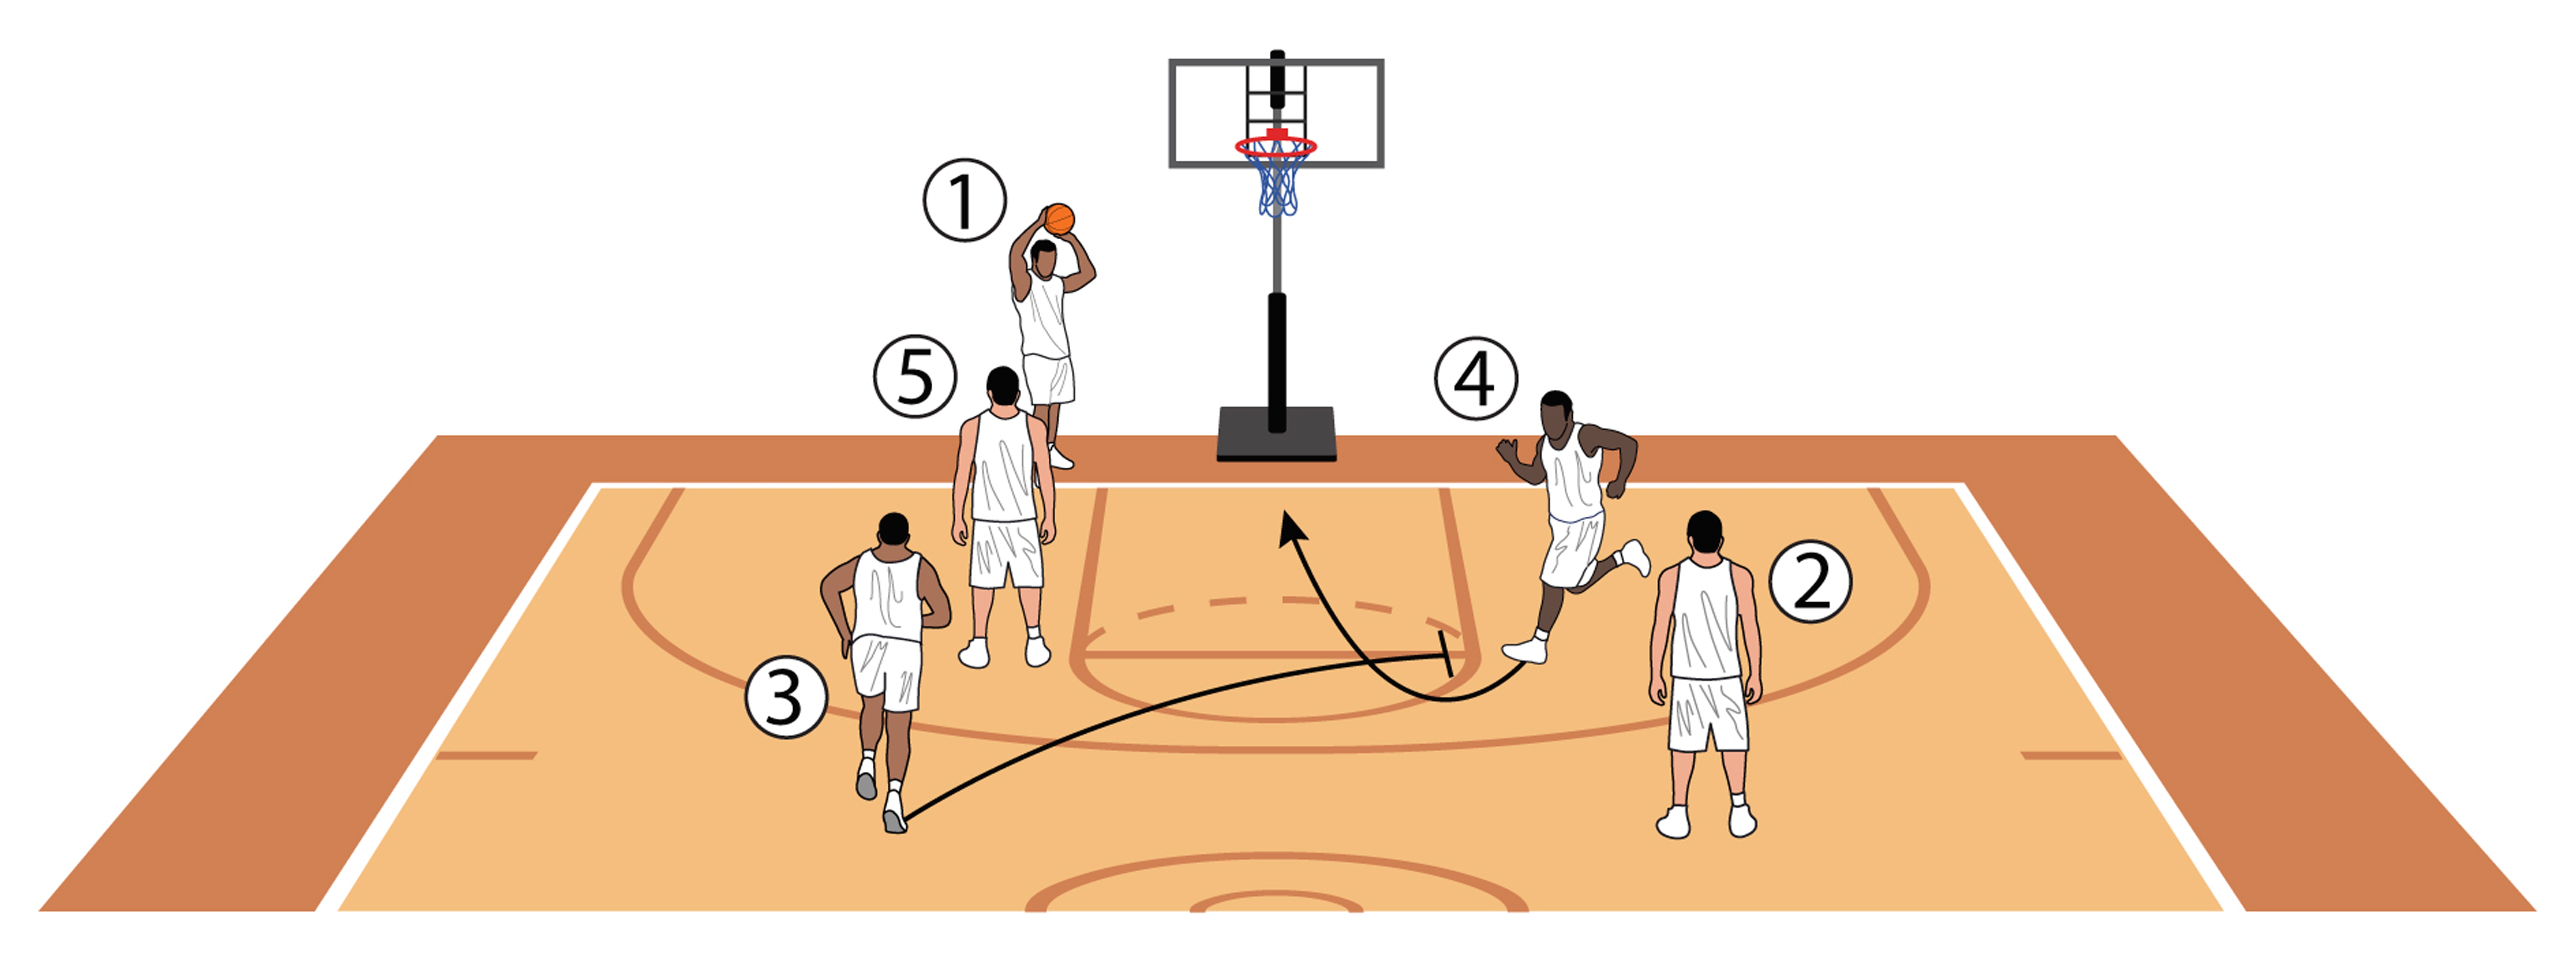 Basketball Coach Weekly - Drills & Skills - 2 Flashes To The Hoop To Net 2  Points